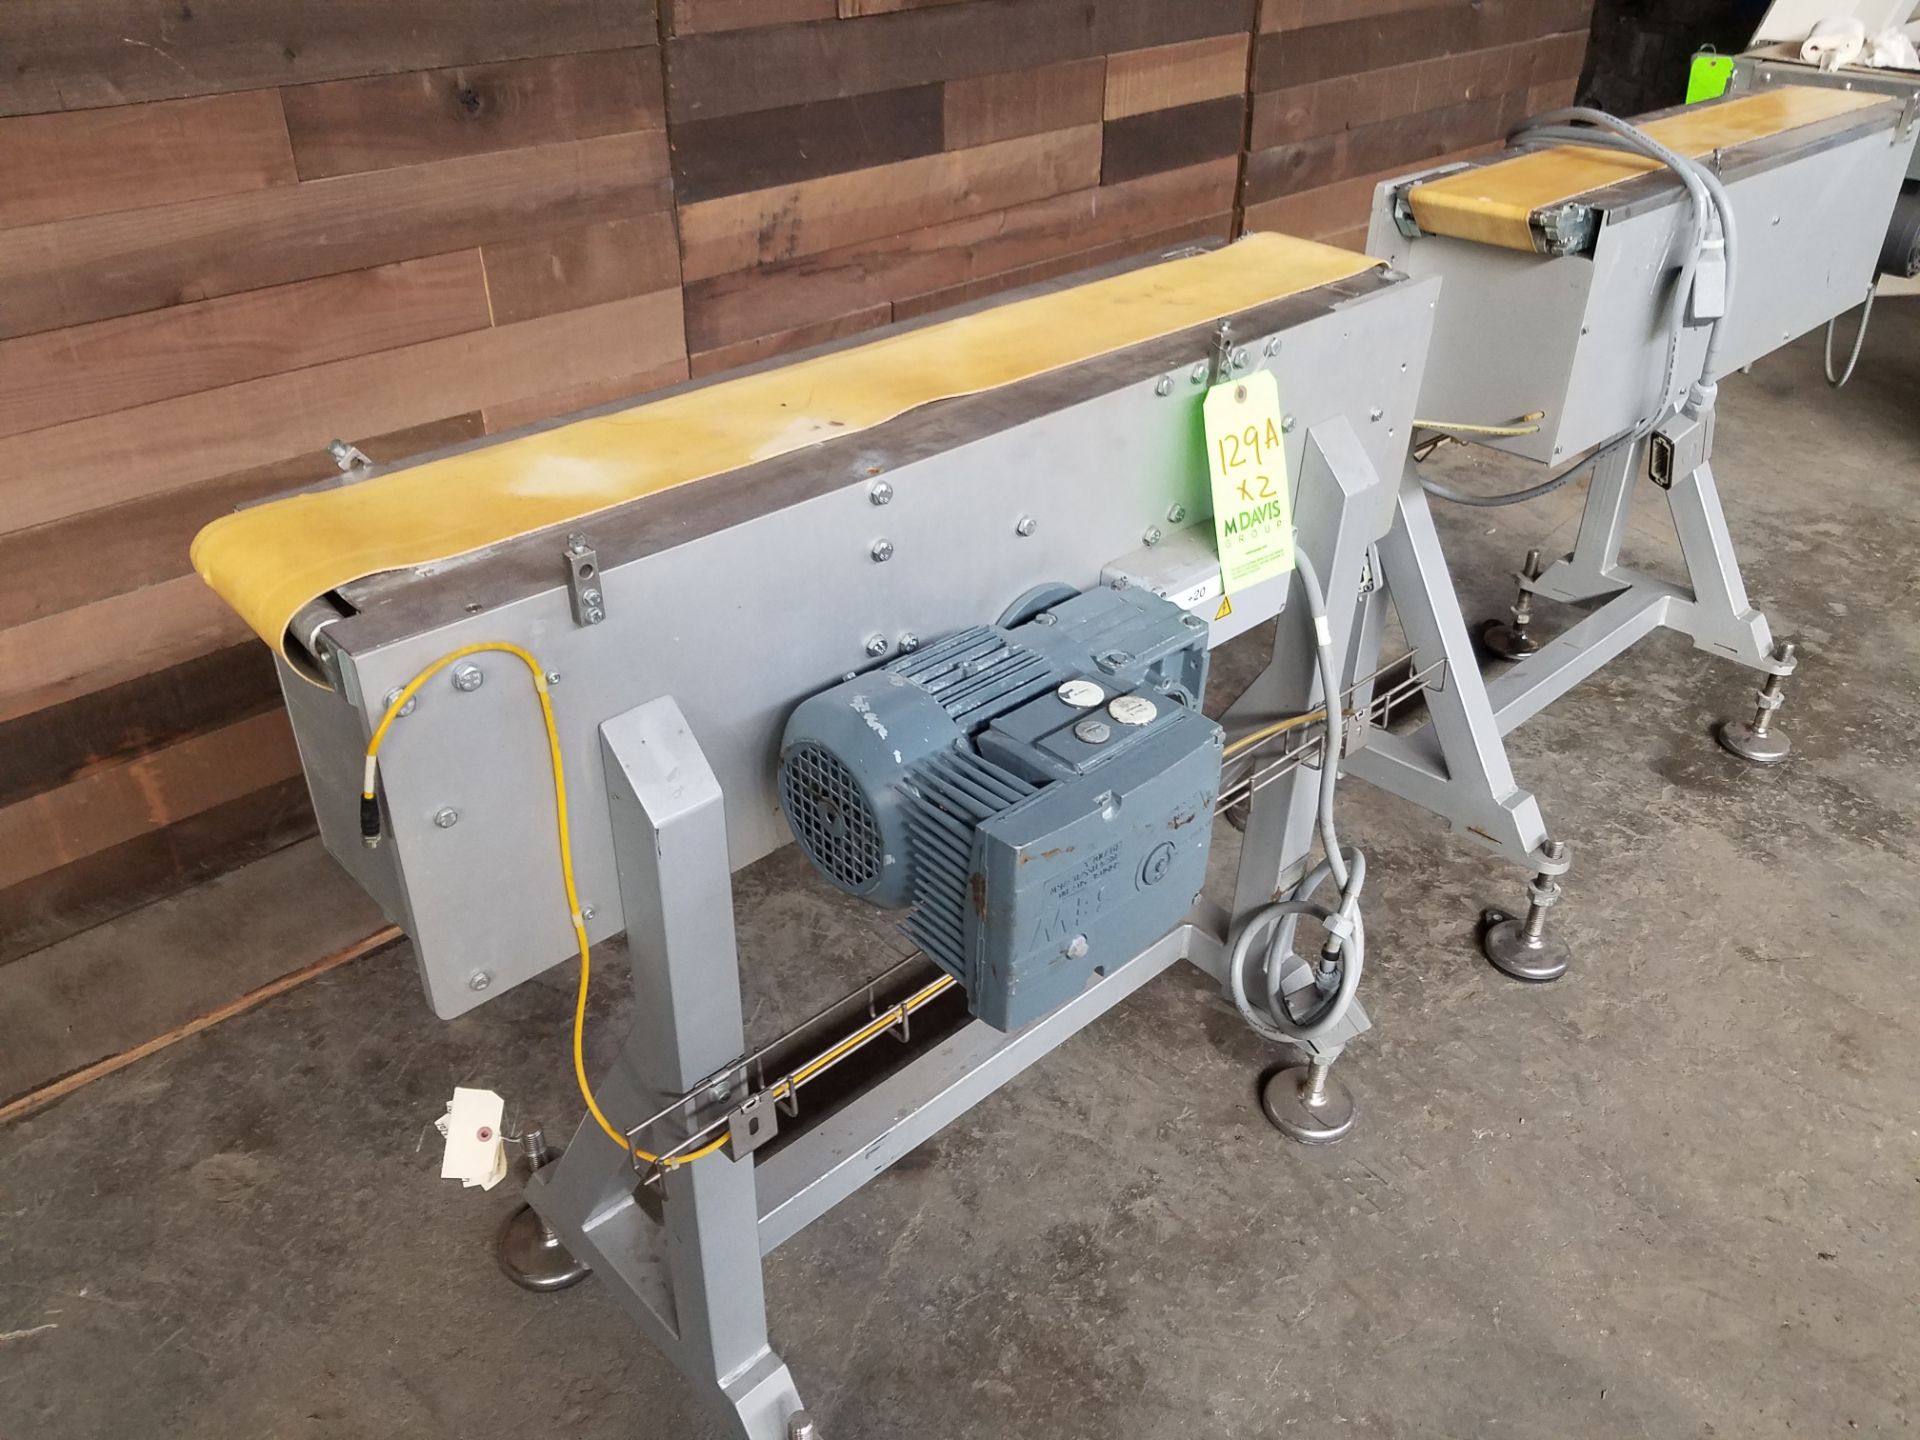 Two 5" wide x 40" long x 34" height belt conveyors (Handling, Loading & Site Management Fee: $25)